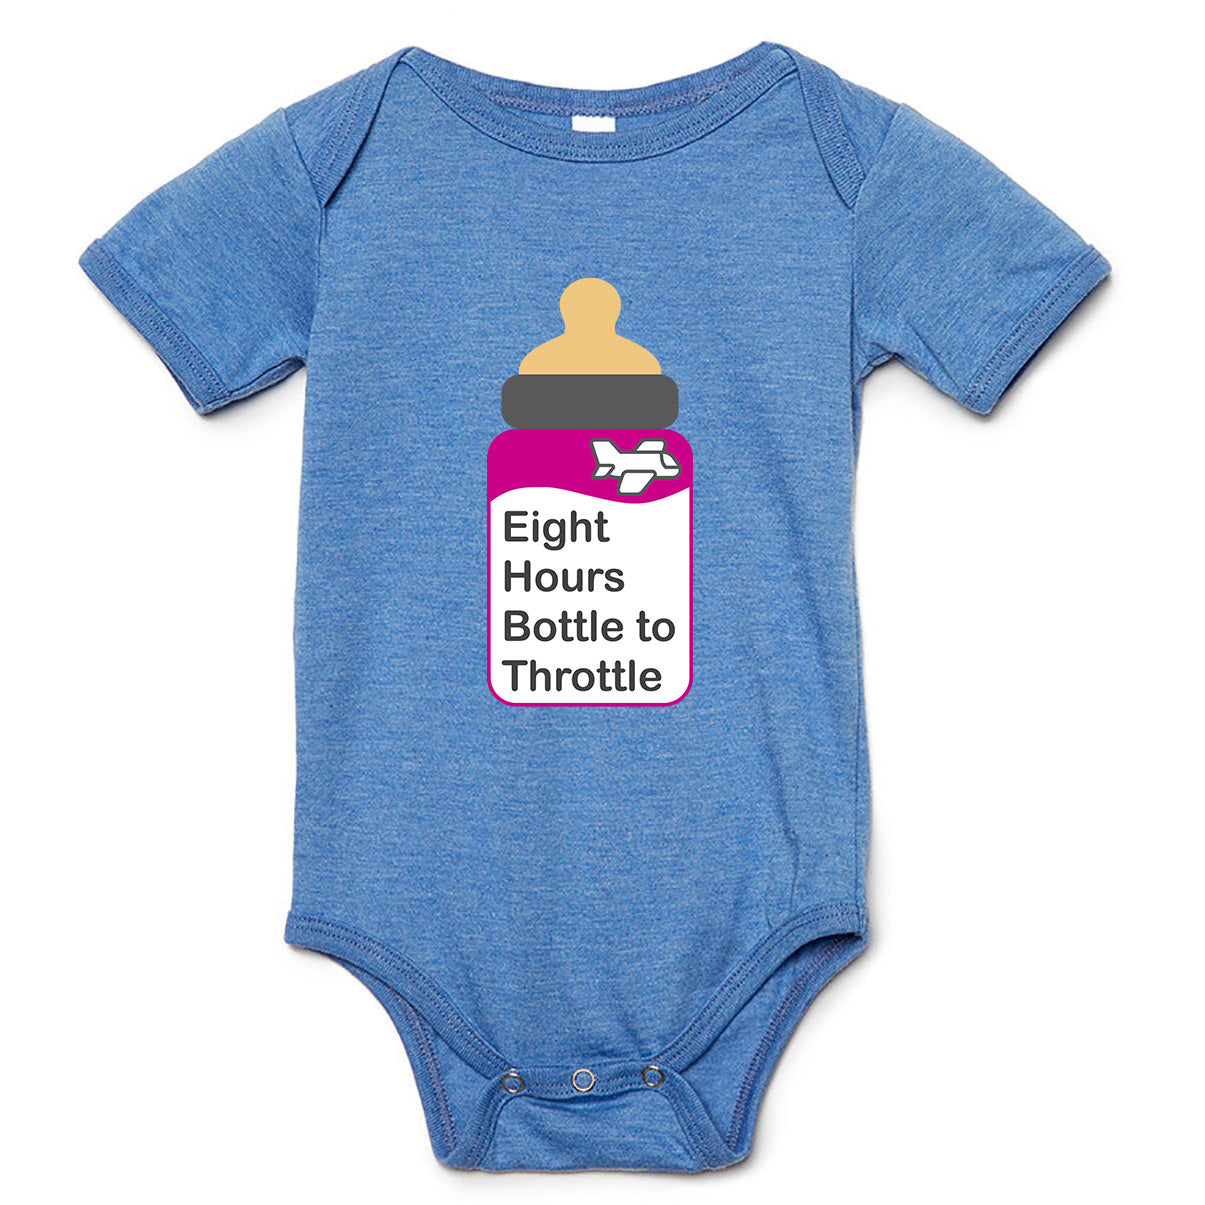 8 Hours Bottle to Throttle Baby One-piece